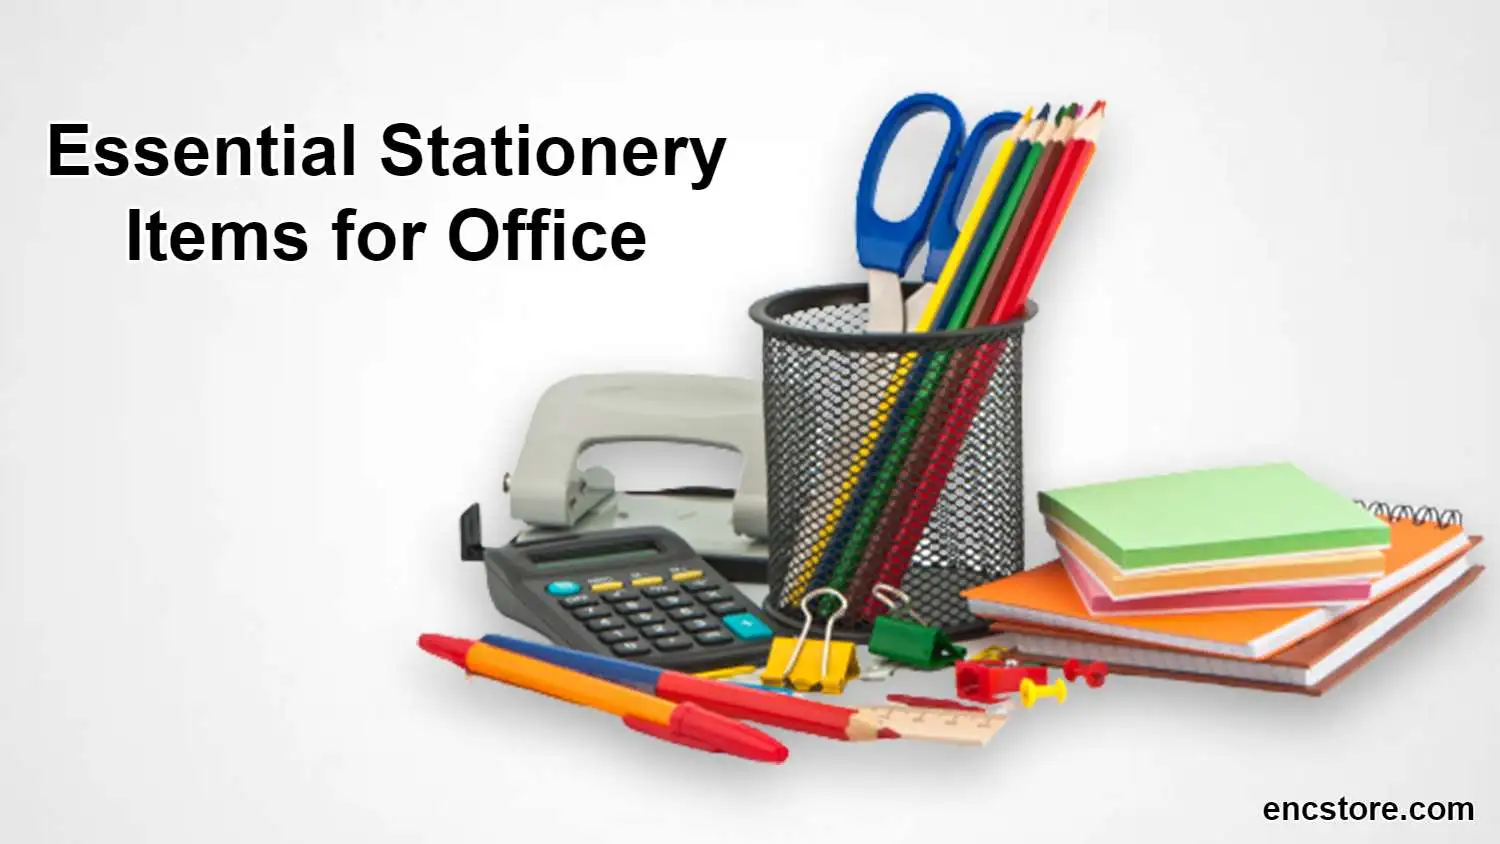 Stationery Items for Office